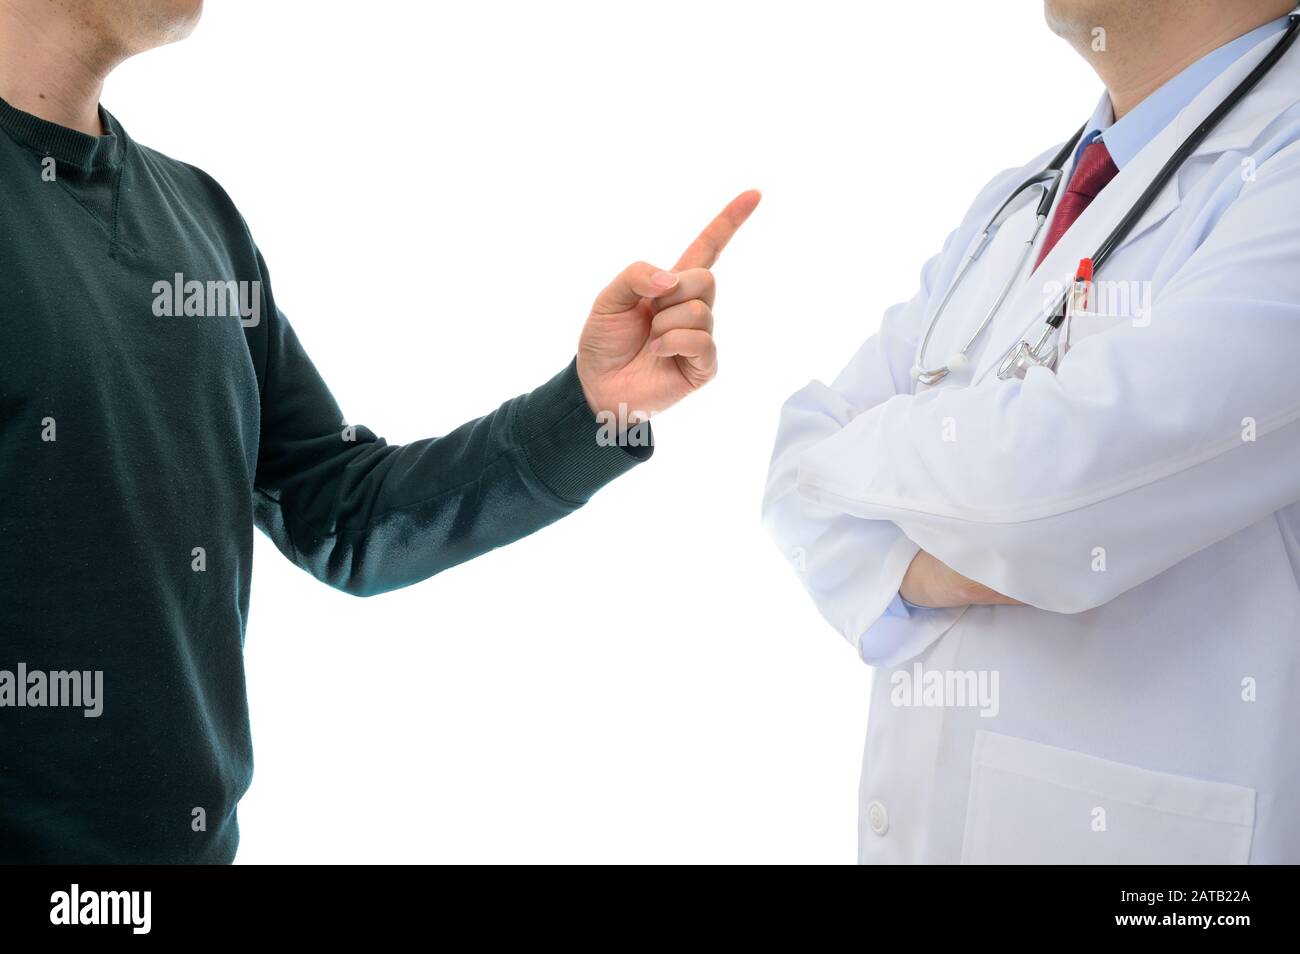 Patients protesting to the doctor. Medical dispute concept Stock Photo